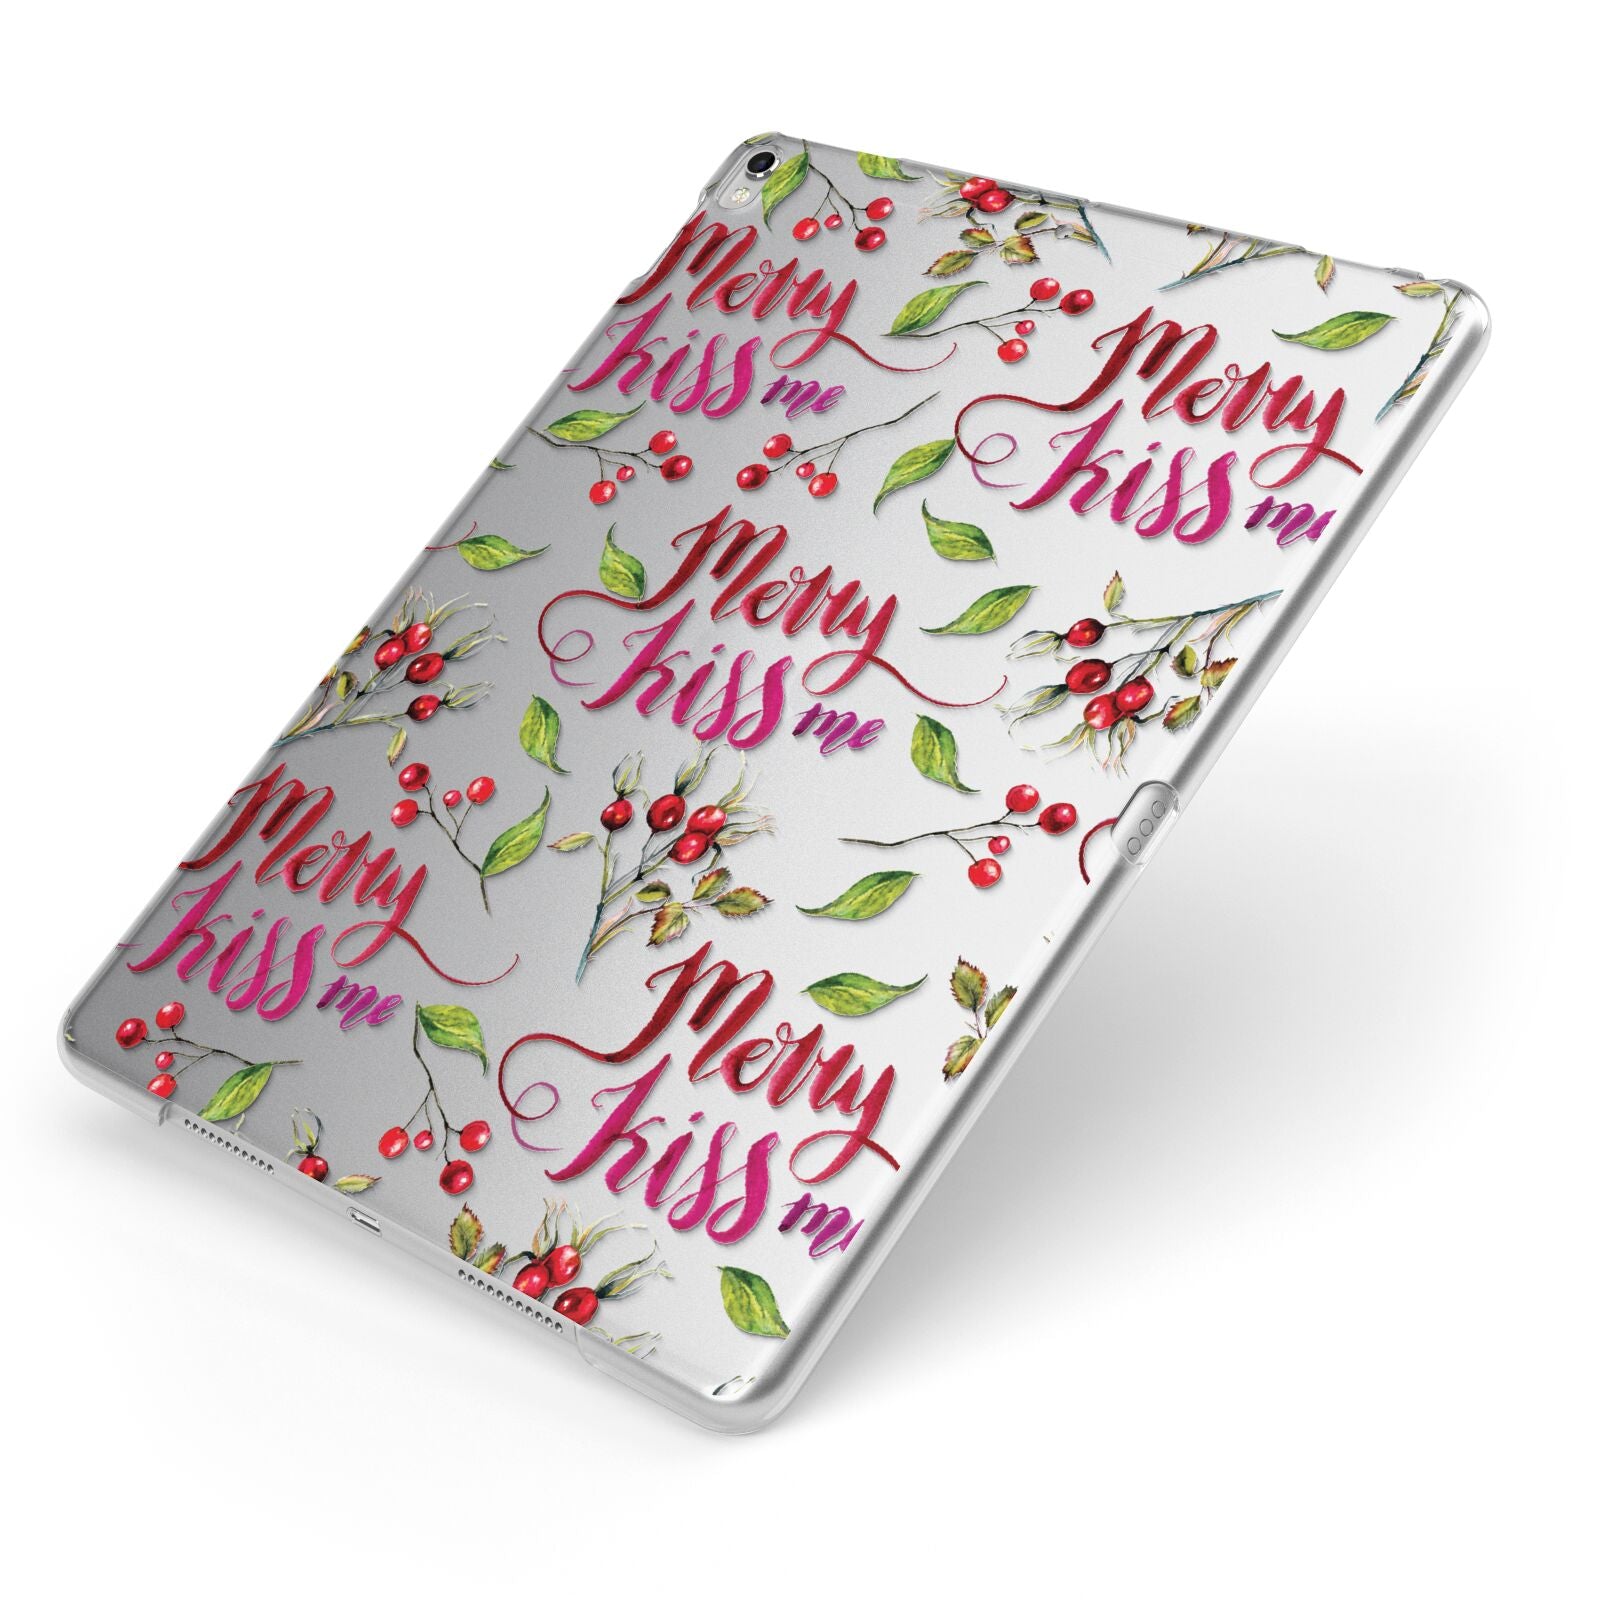 Merry kiss me Apple iPad Case on Silver iPad Side View